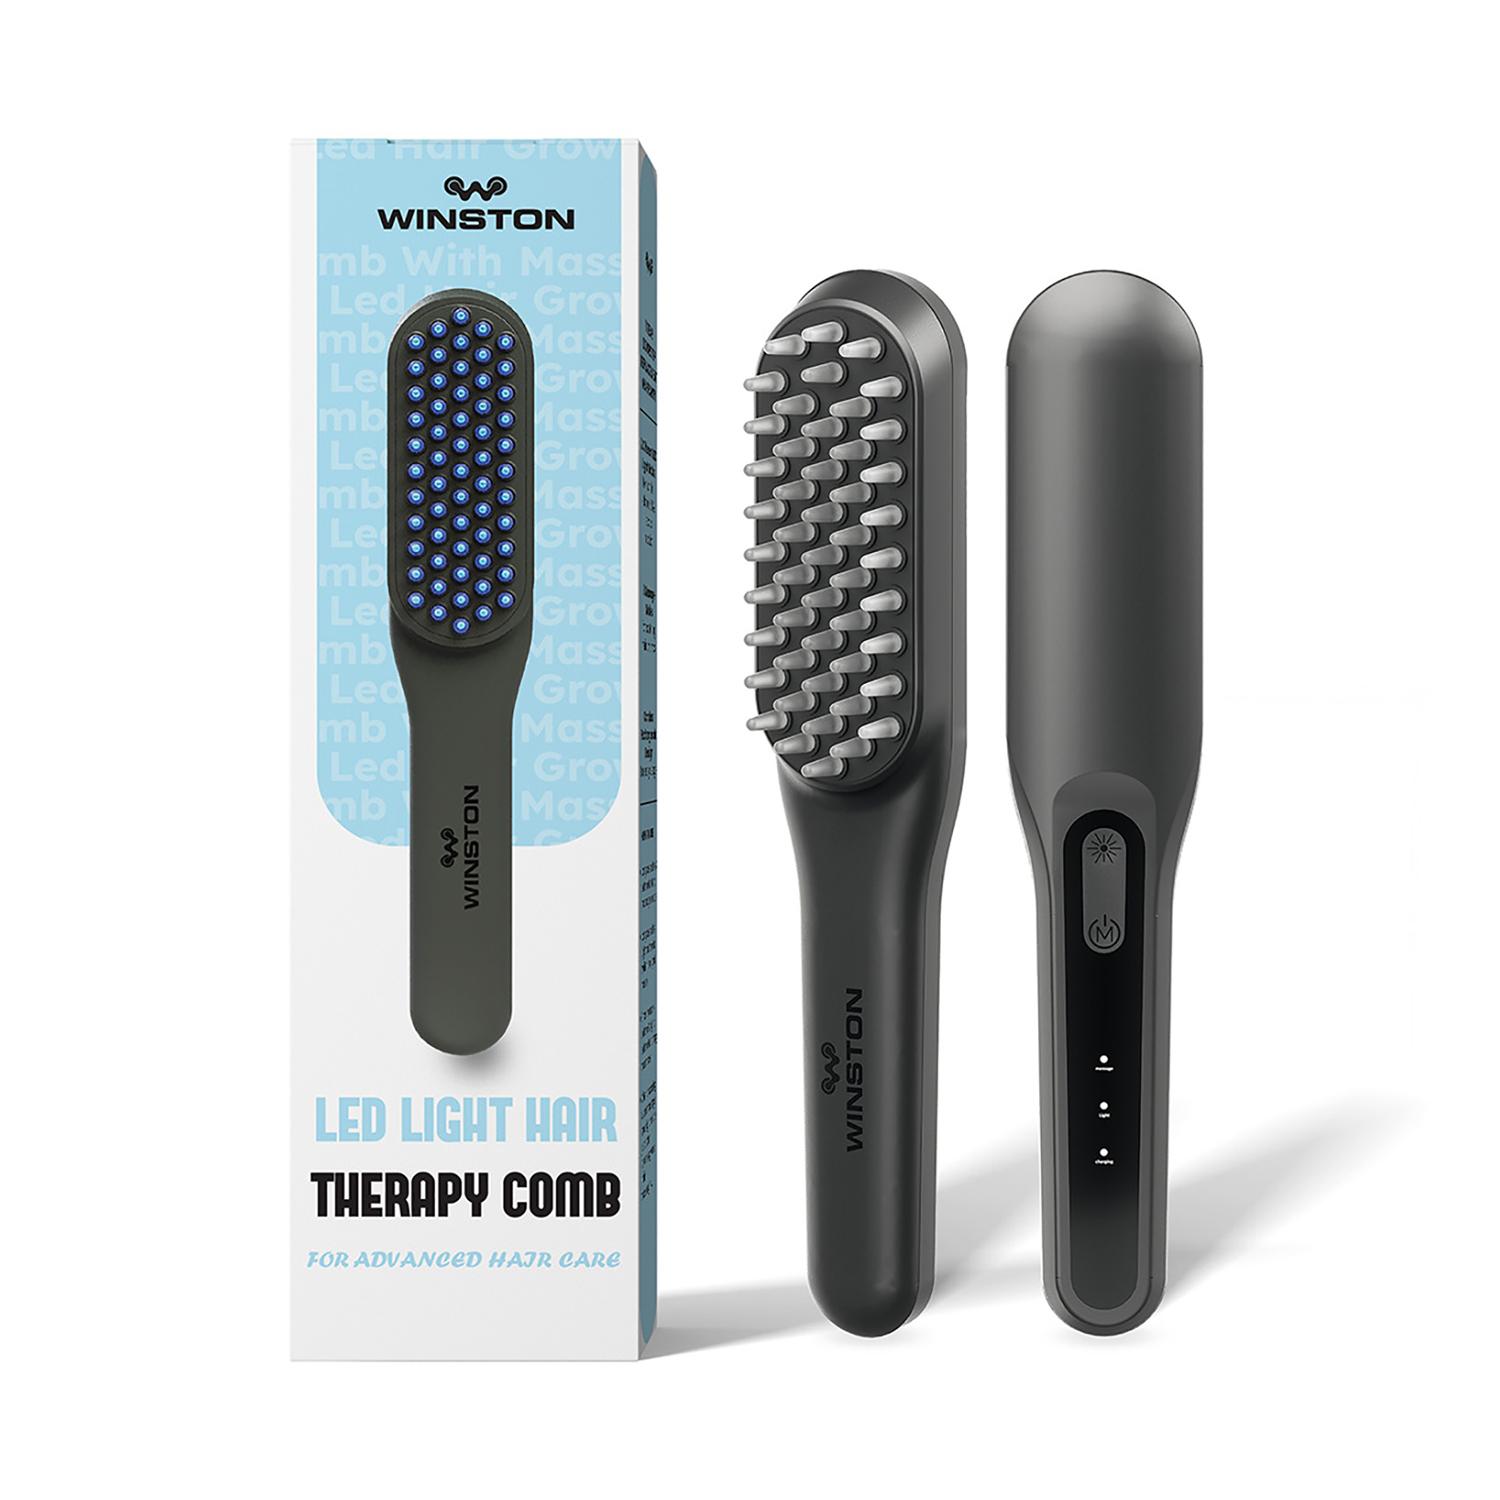 WINSTON | WINSTON LED Hair Growth Therapy Comb - Grey (1Pc)